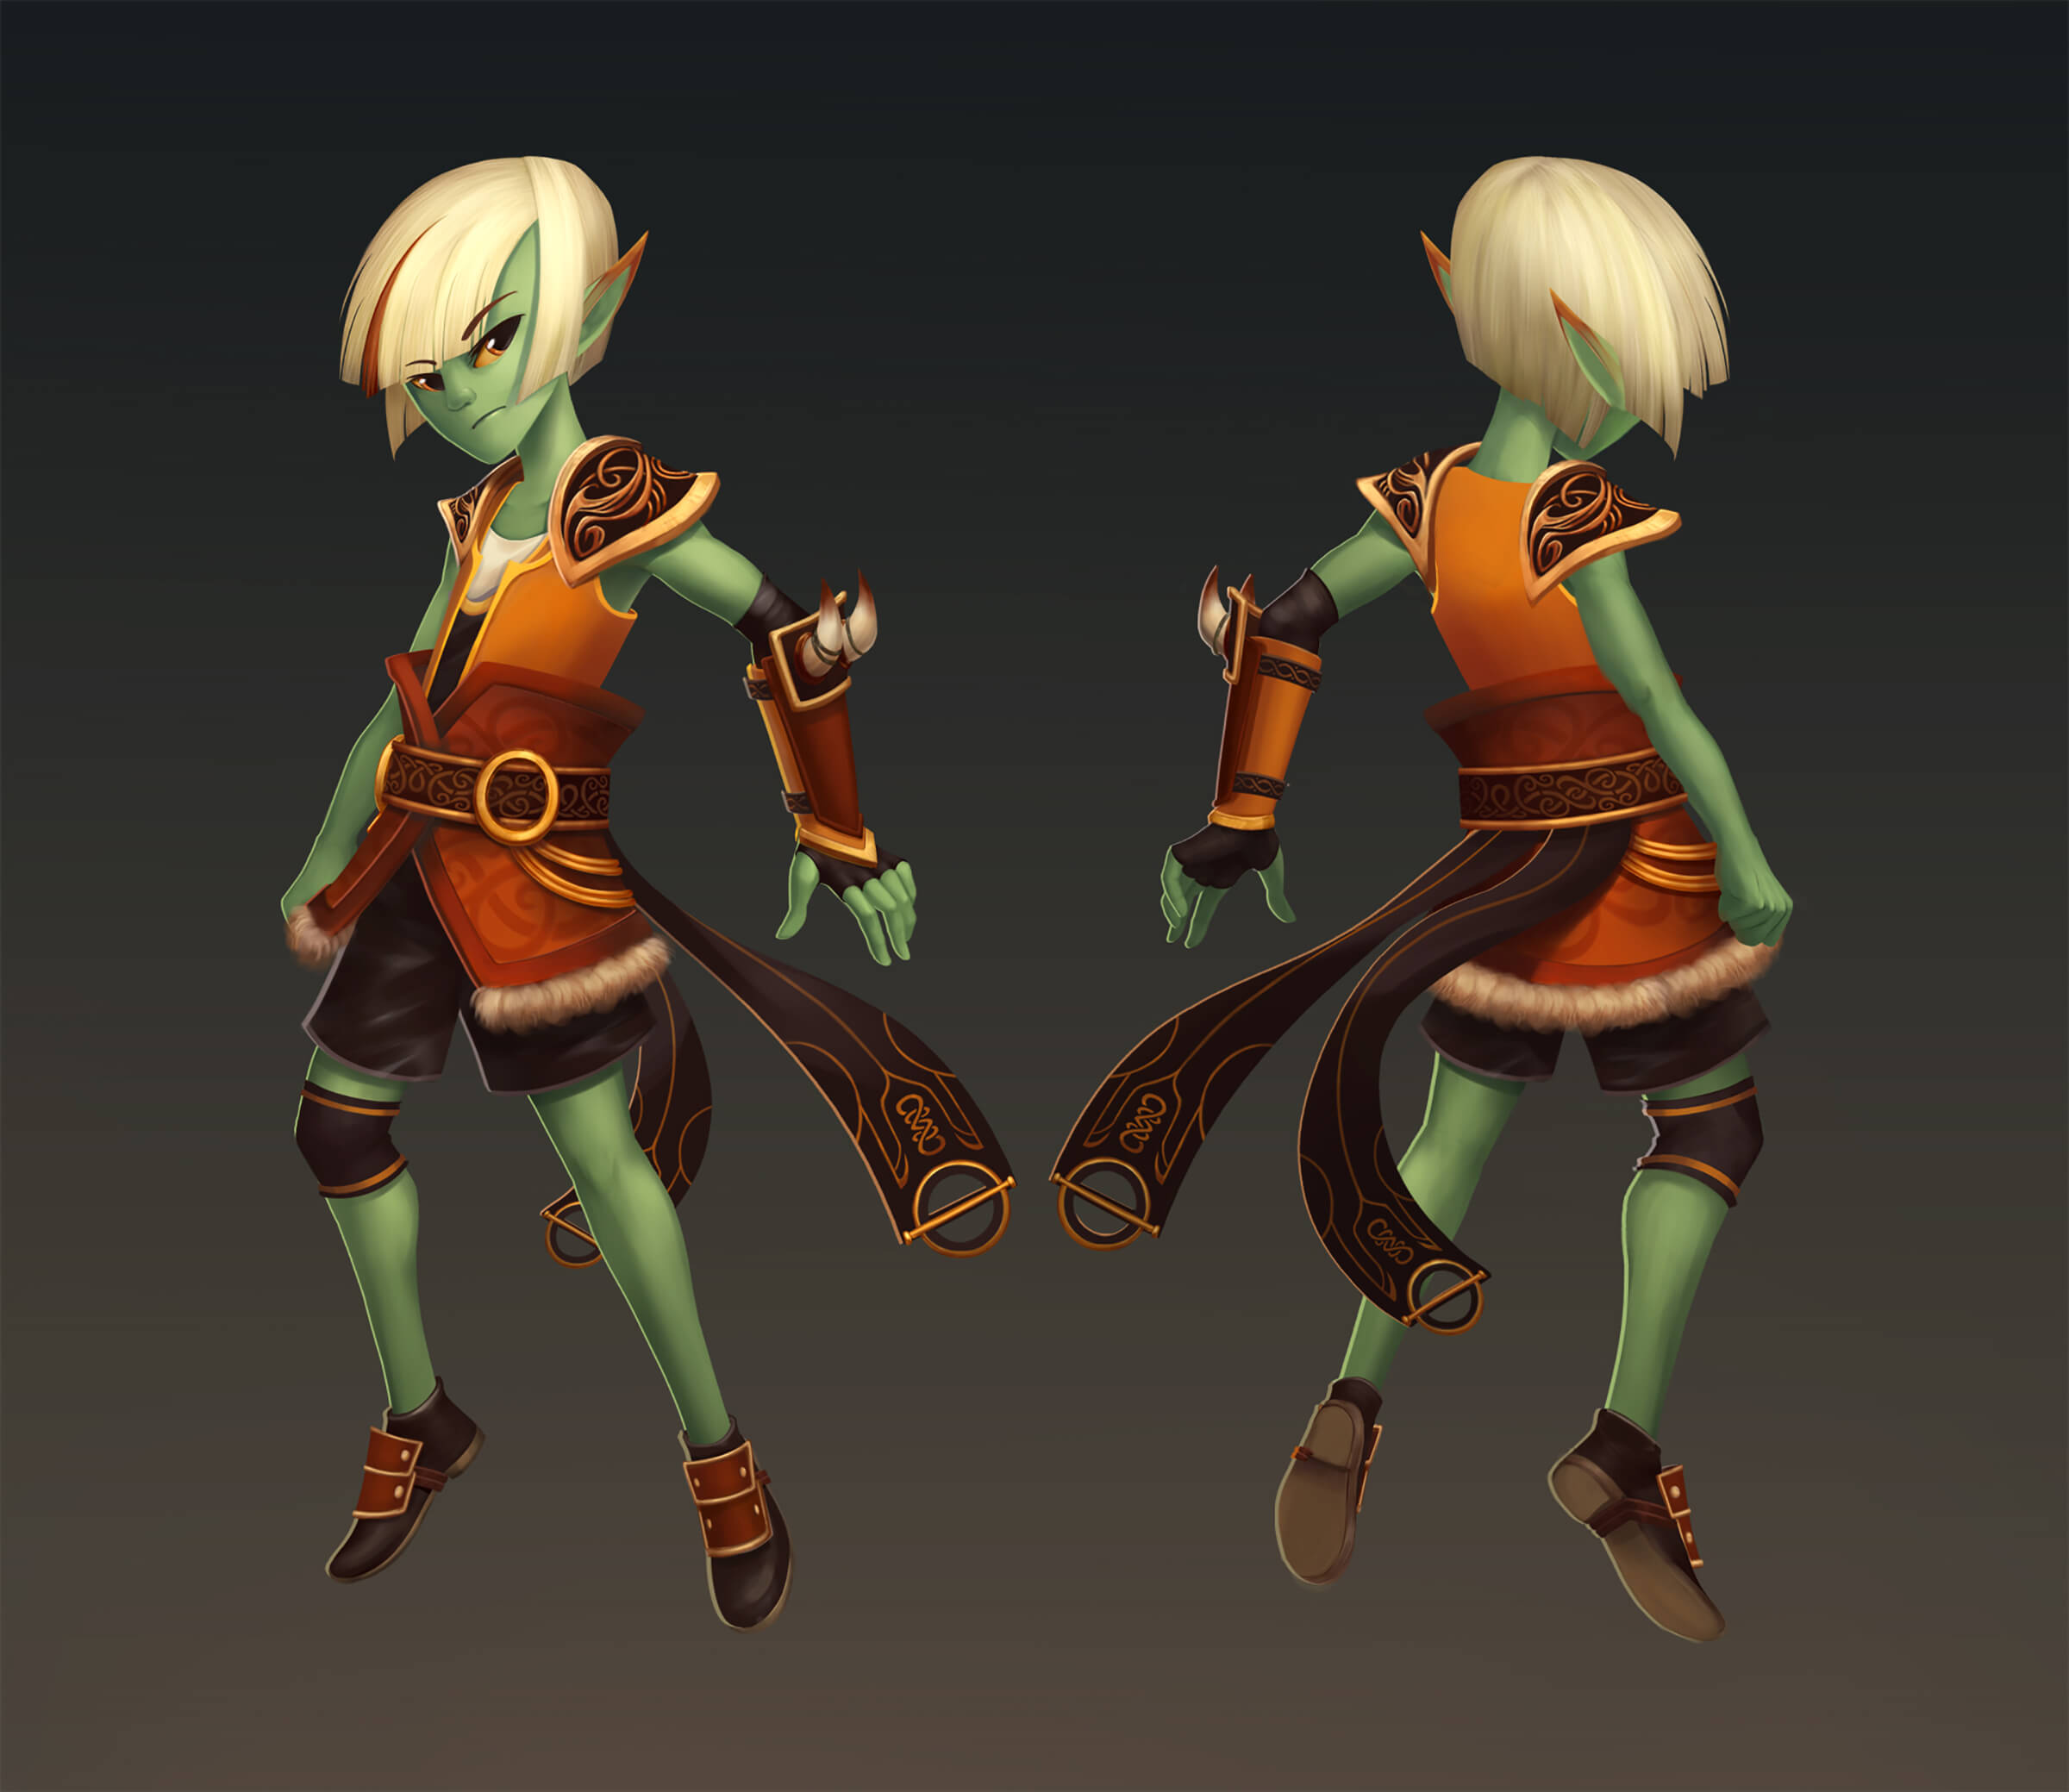 A turnaround sketch of a green elf-like character with blond hair in ornate, light-leather armor.